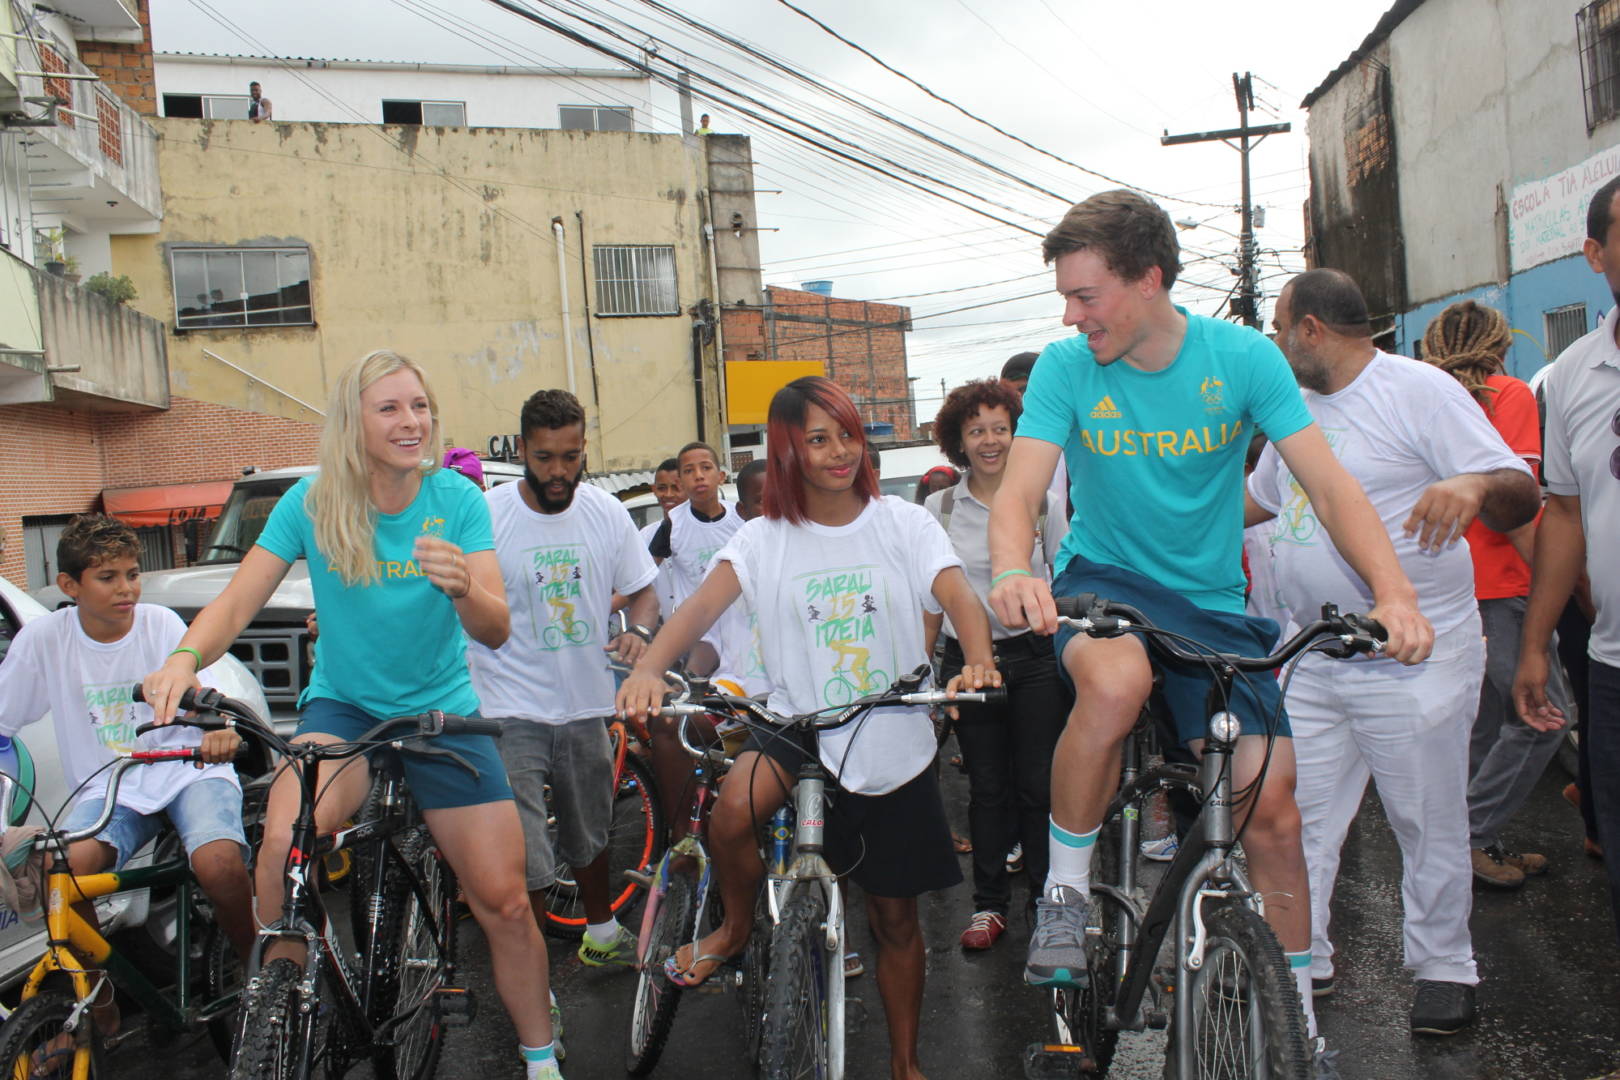 Olympian cyclists Annette and Alex Edmondson ride bikes with World Vision sponsored child Vanessa and her youth group in Brazil.